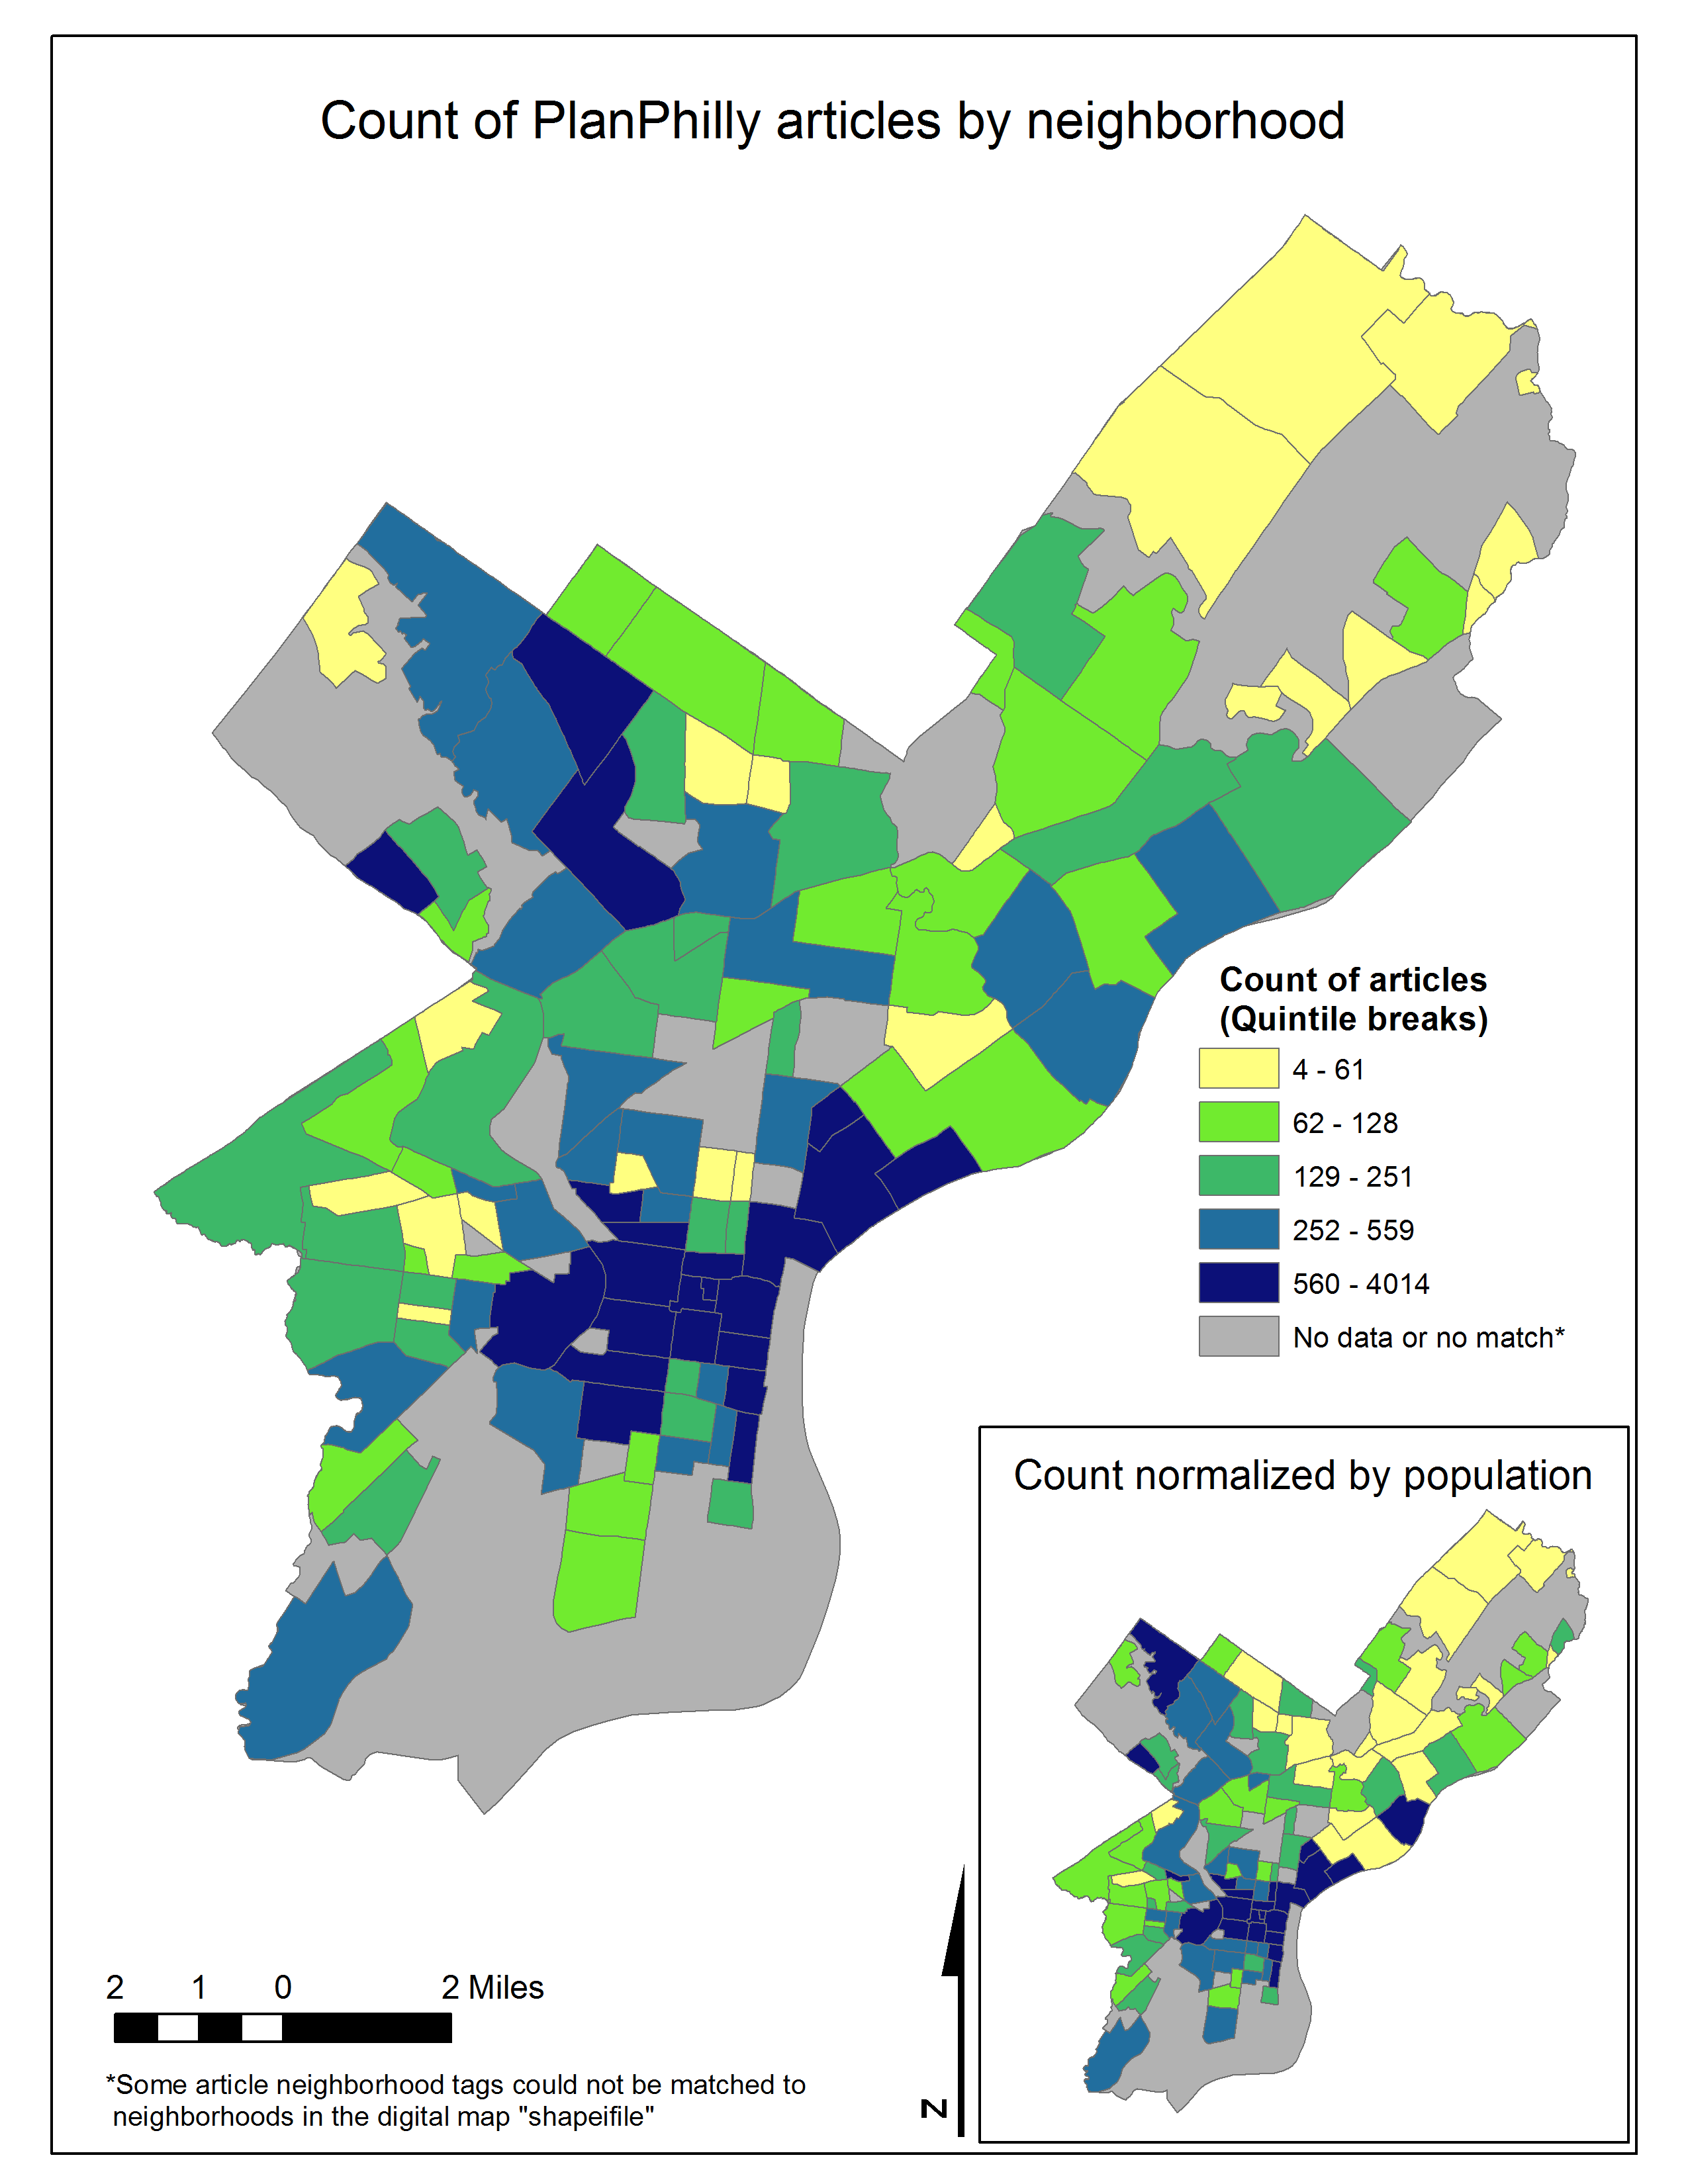 Figure 3: Count of PlanPhilly articles by neighborhood